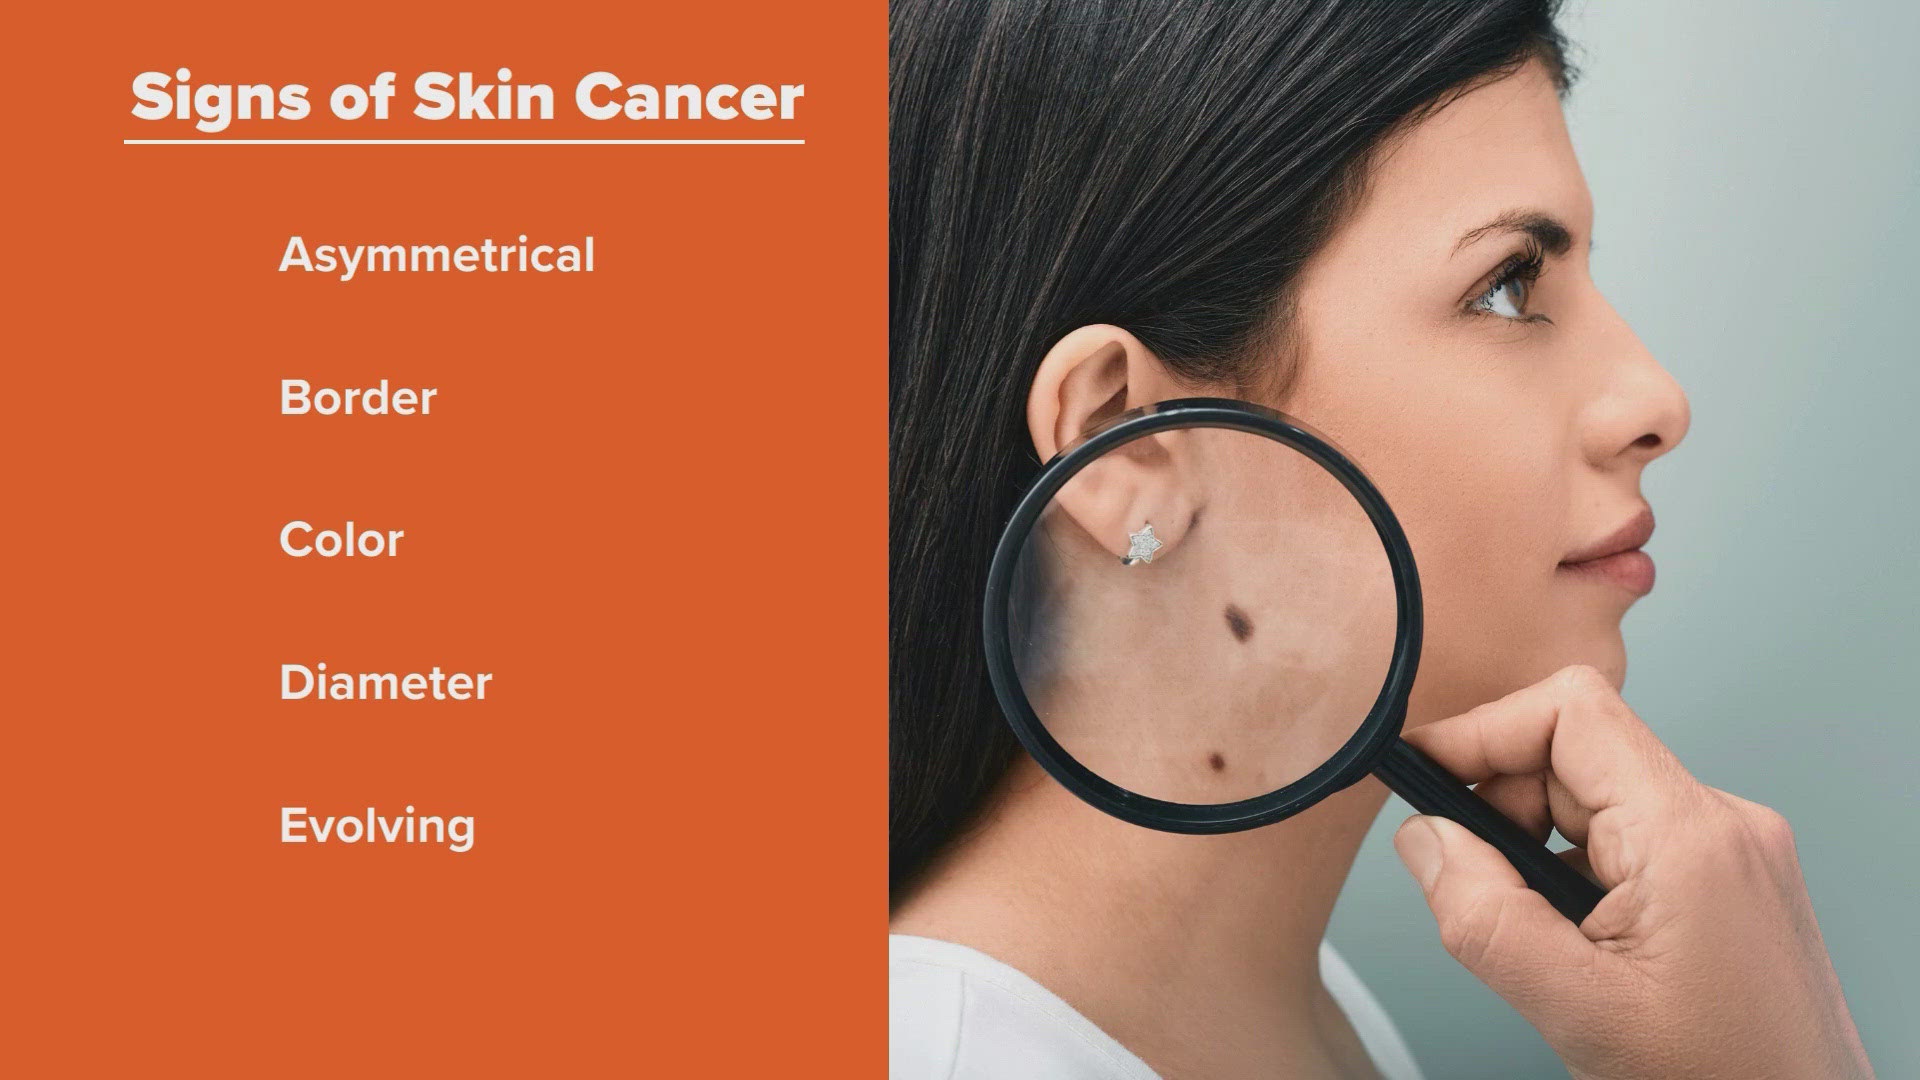 Medical professionals urge people to routinely check for signs of skin cancer and get any suspicious spots evaluated.